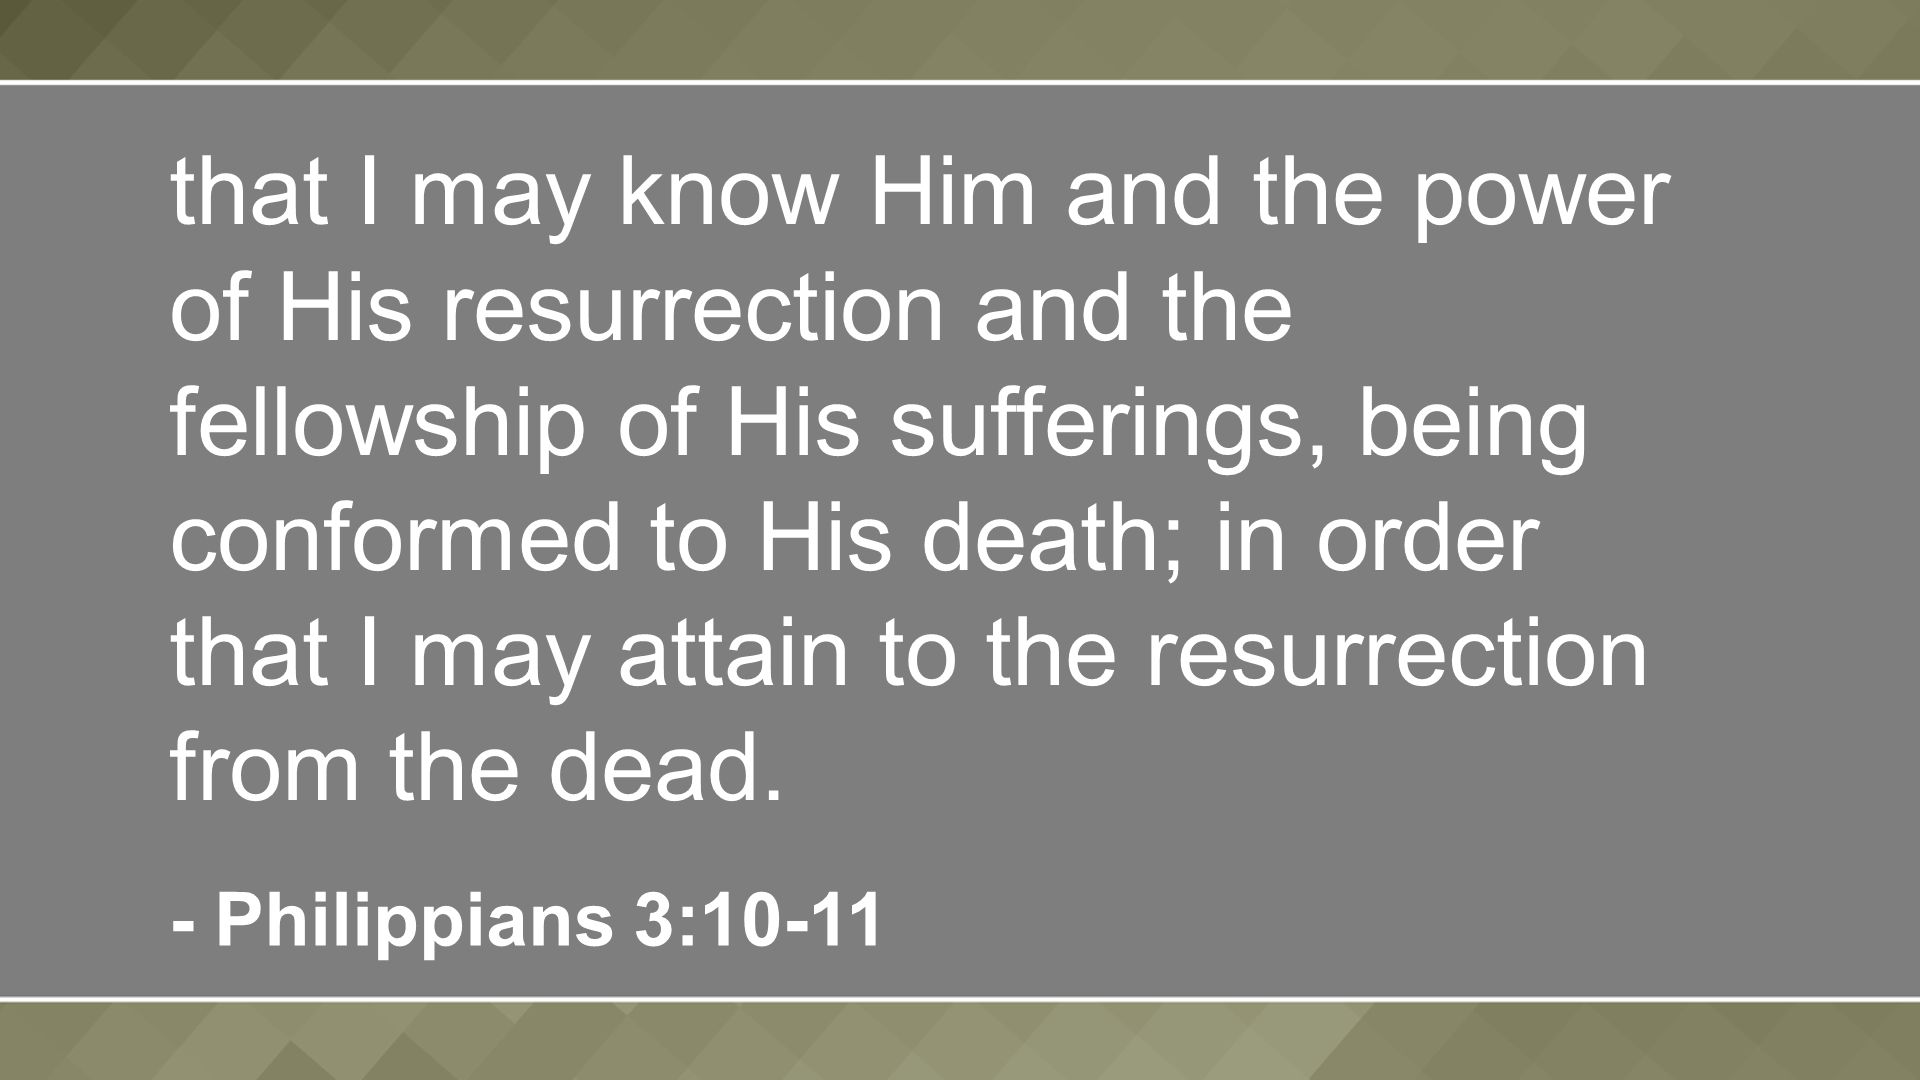 that I may know Him and the power of His resurrection and the fellowship of His sufferings, being conformed to His death; in order that I may attain to the resurrection from the dead.